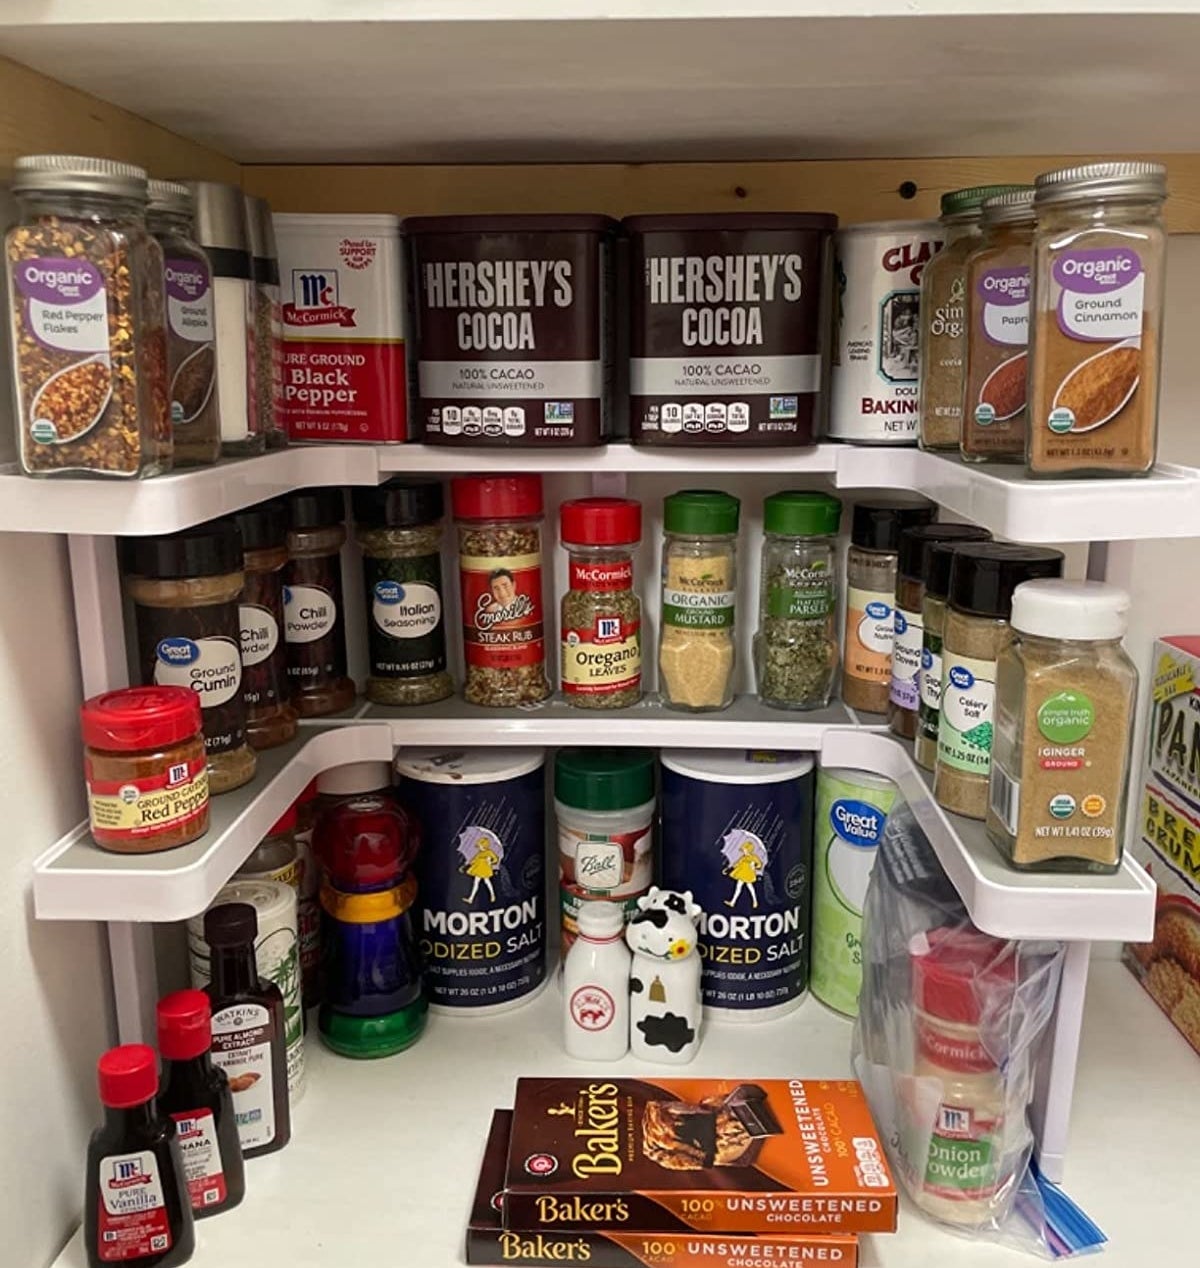 Reviewer image of spice rack filled with spices and pantry items on a shelf